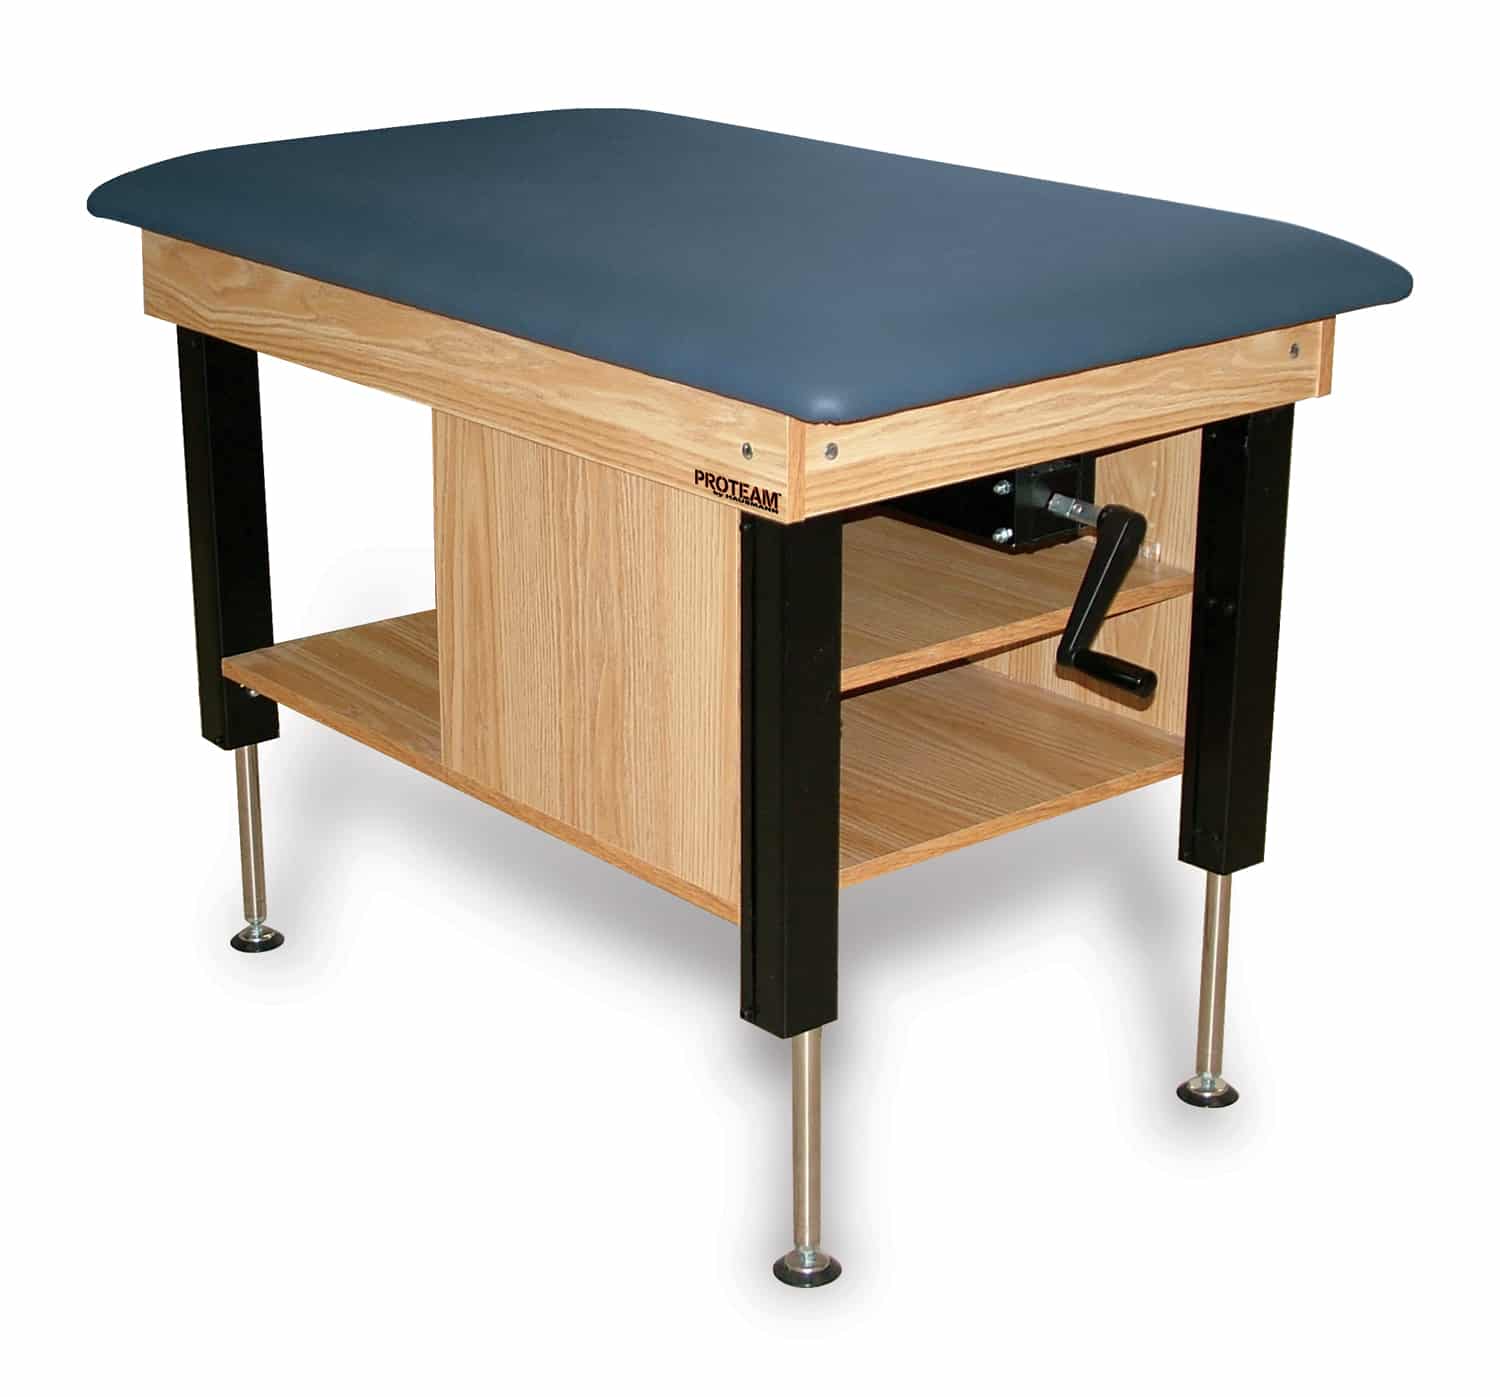 30”x48” Hi-Lo Crank Taping Table with Open Cabinet Storage